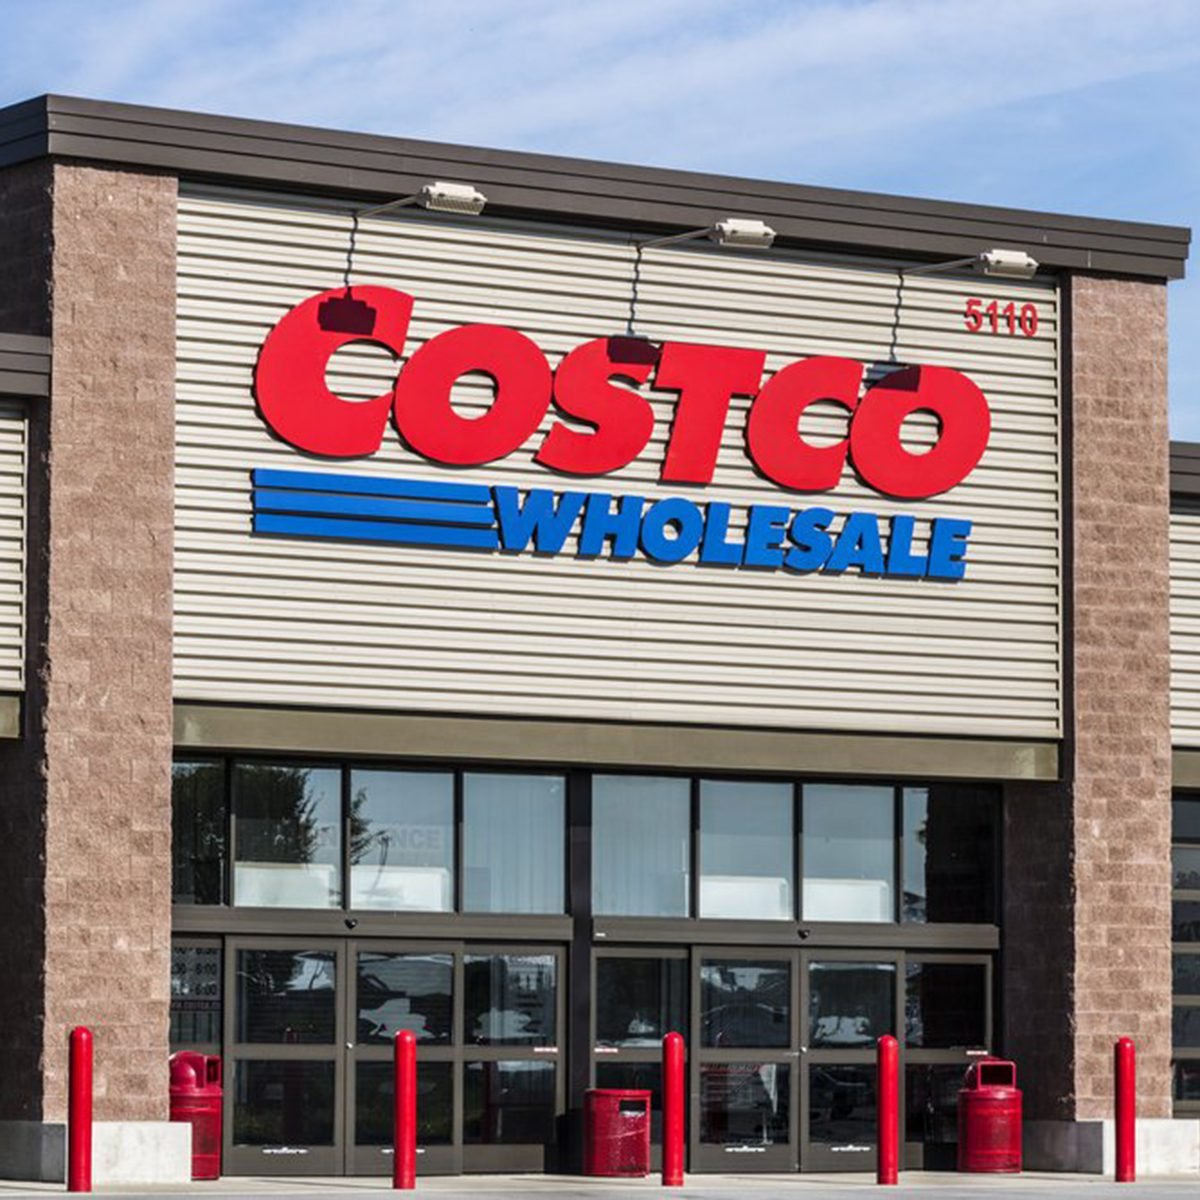 10 Best Costco Deals To Find At The Store